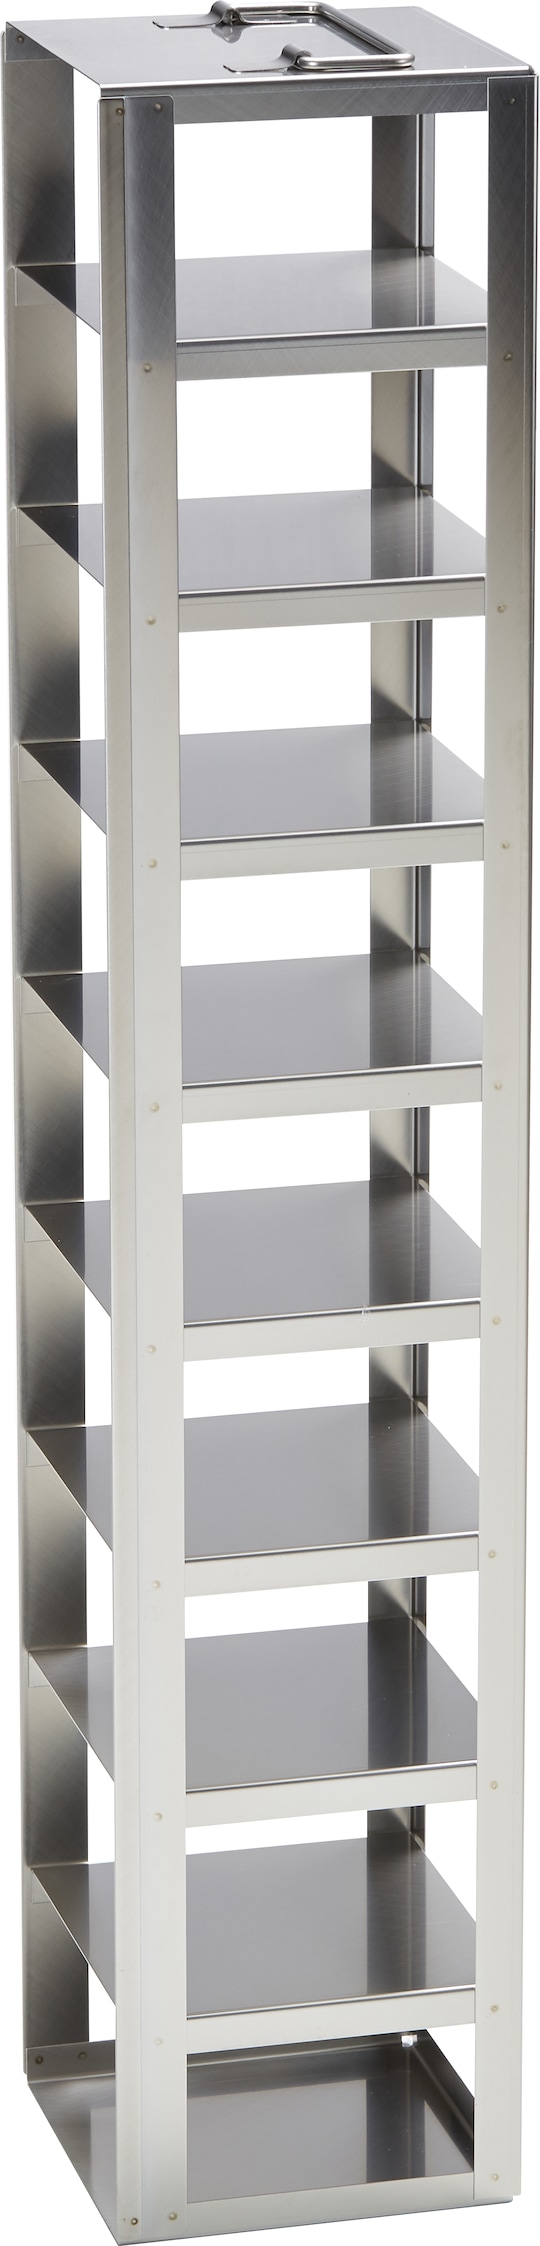 Metal tower rack for (3.0 in/ 76 mm) storage boxes in Eppendorf ULT chest freezer - (6001000310)